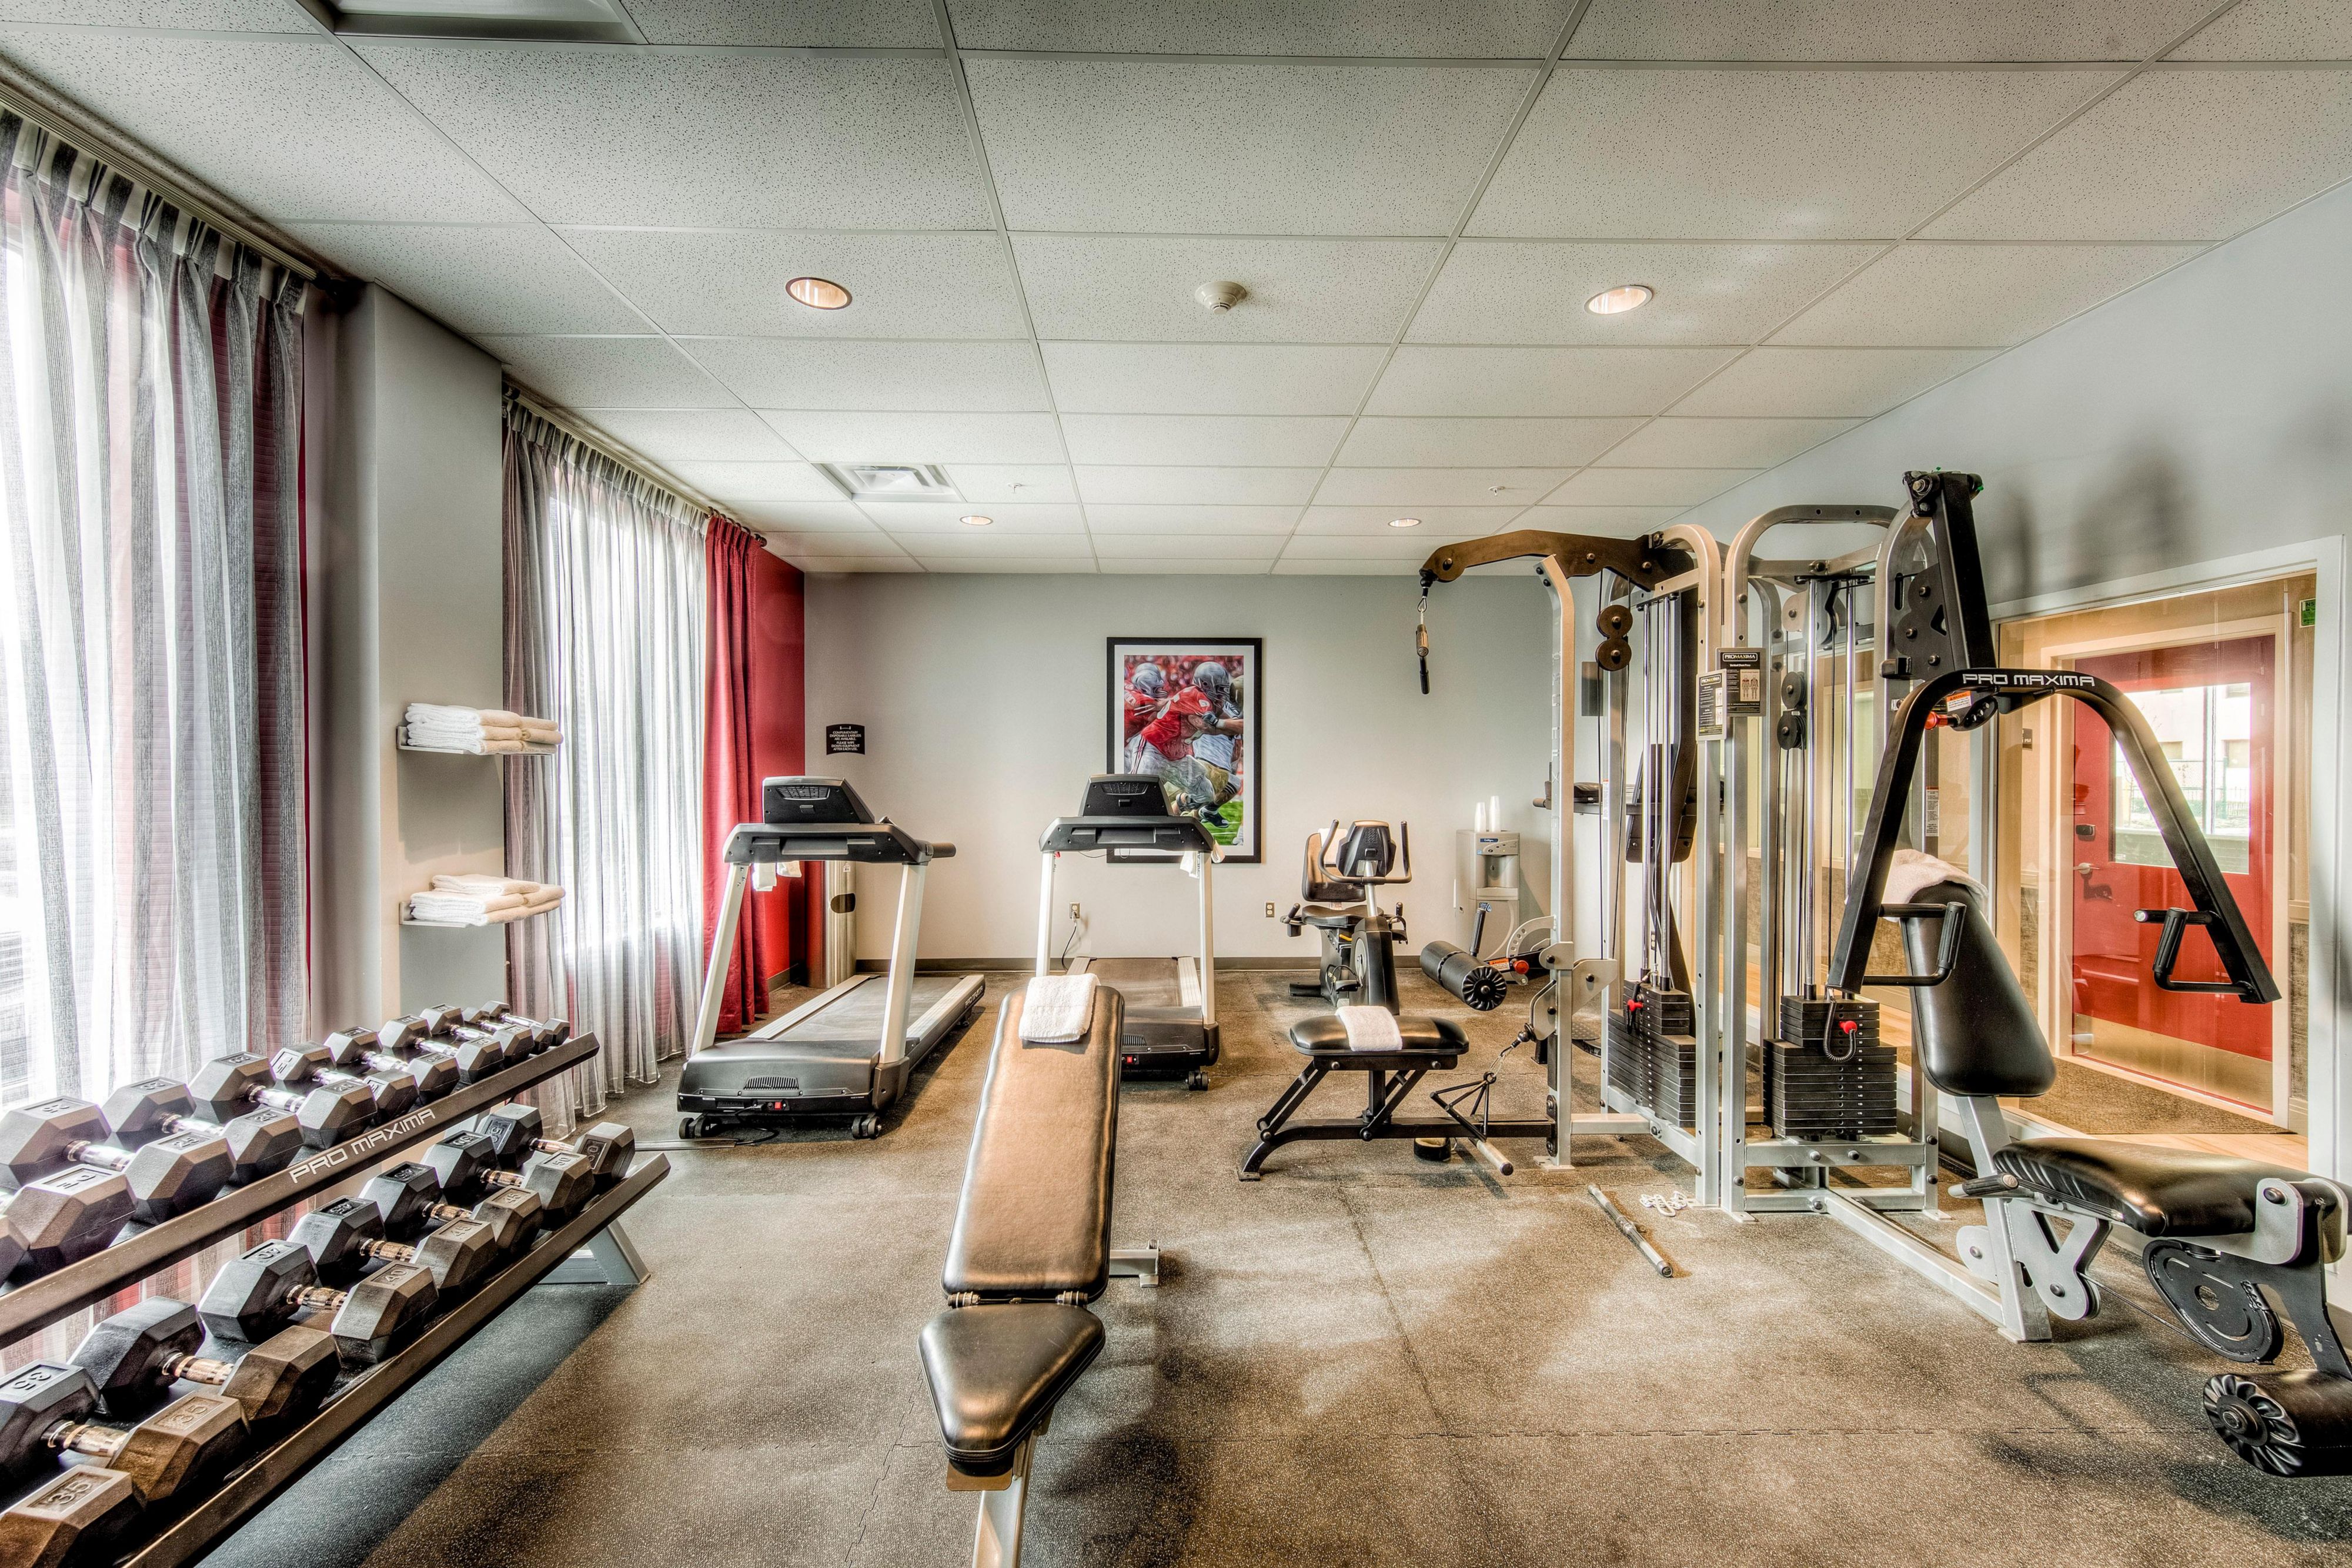 24/7 fully-equipped fitness center